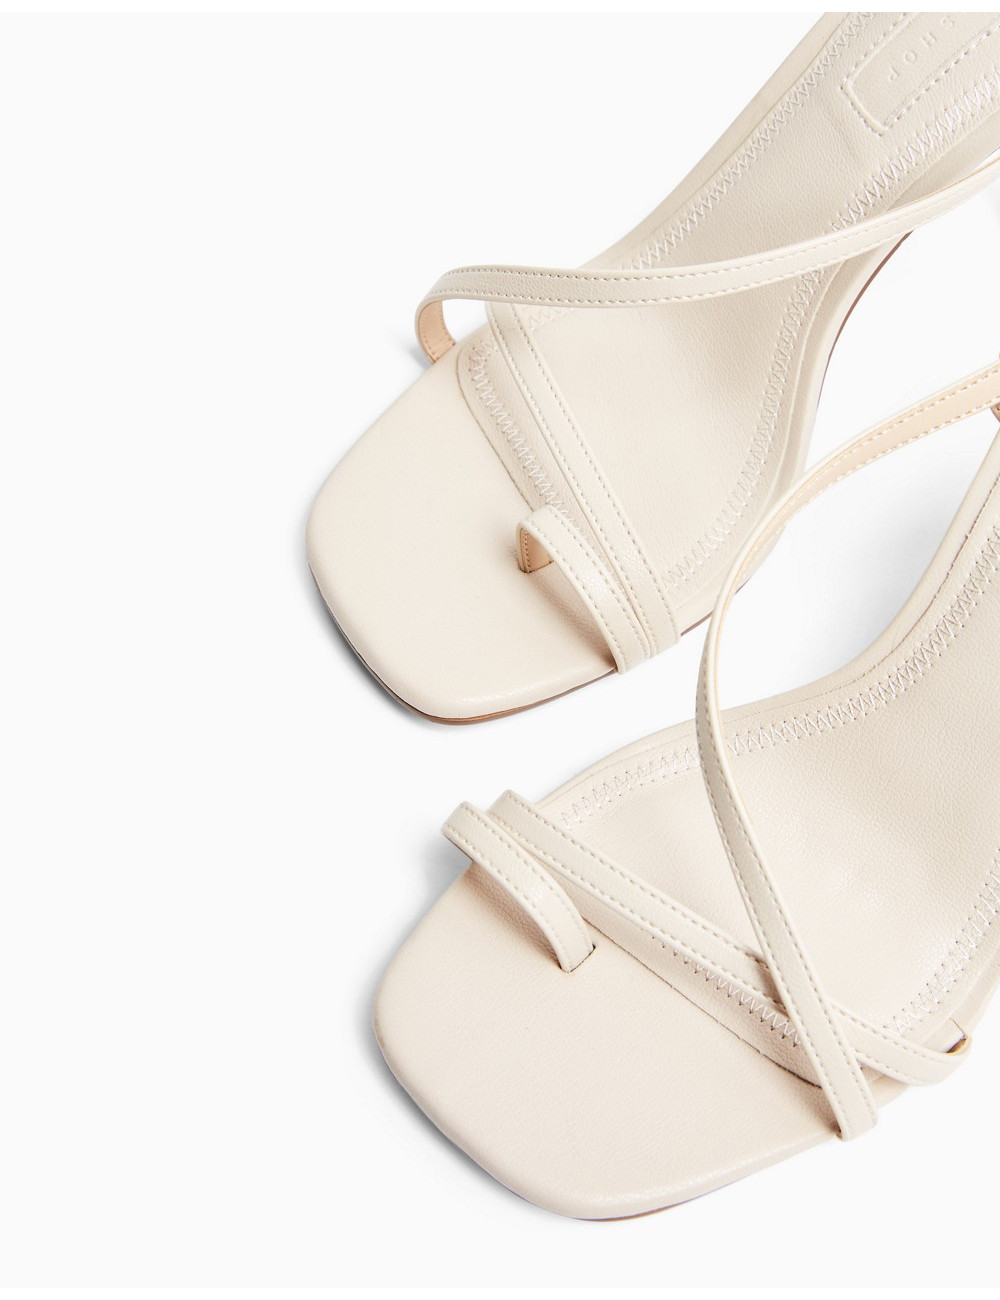 Topshop strappy heeled...